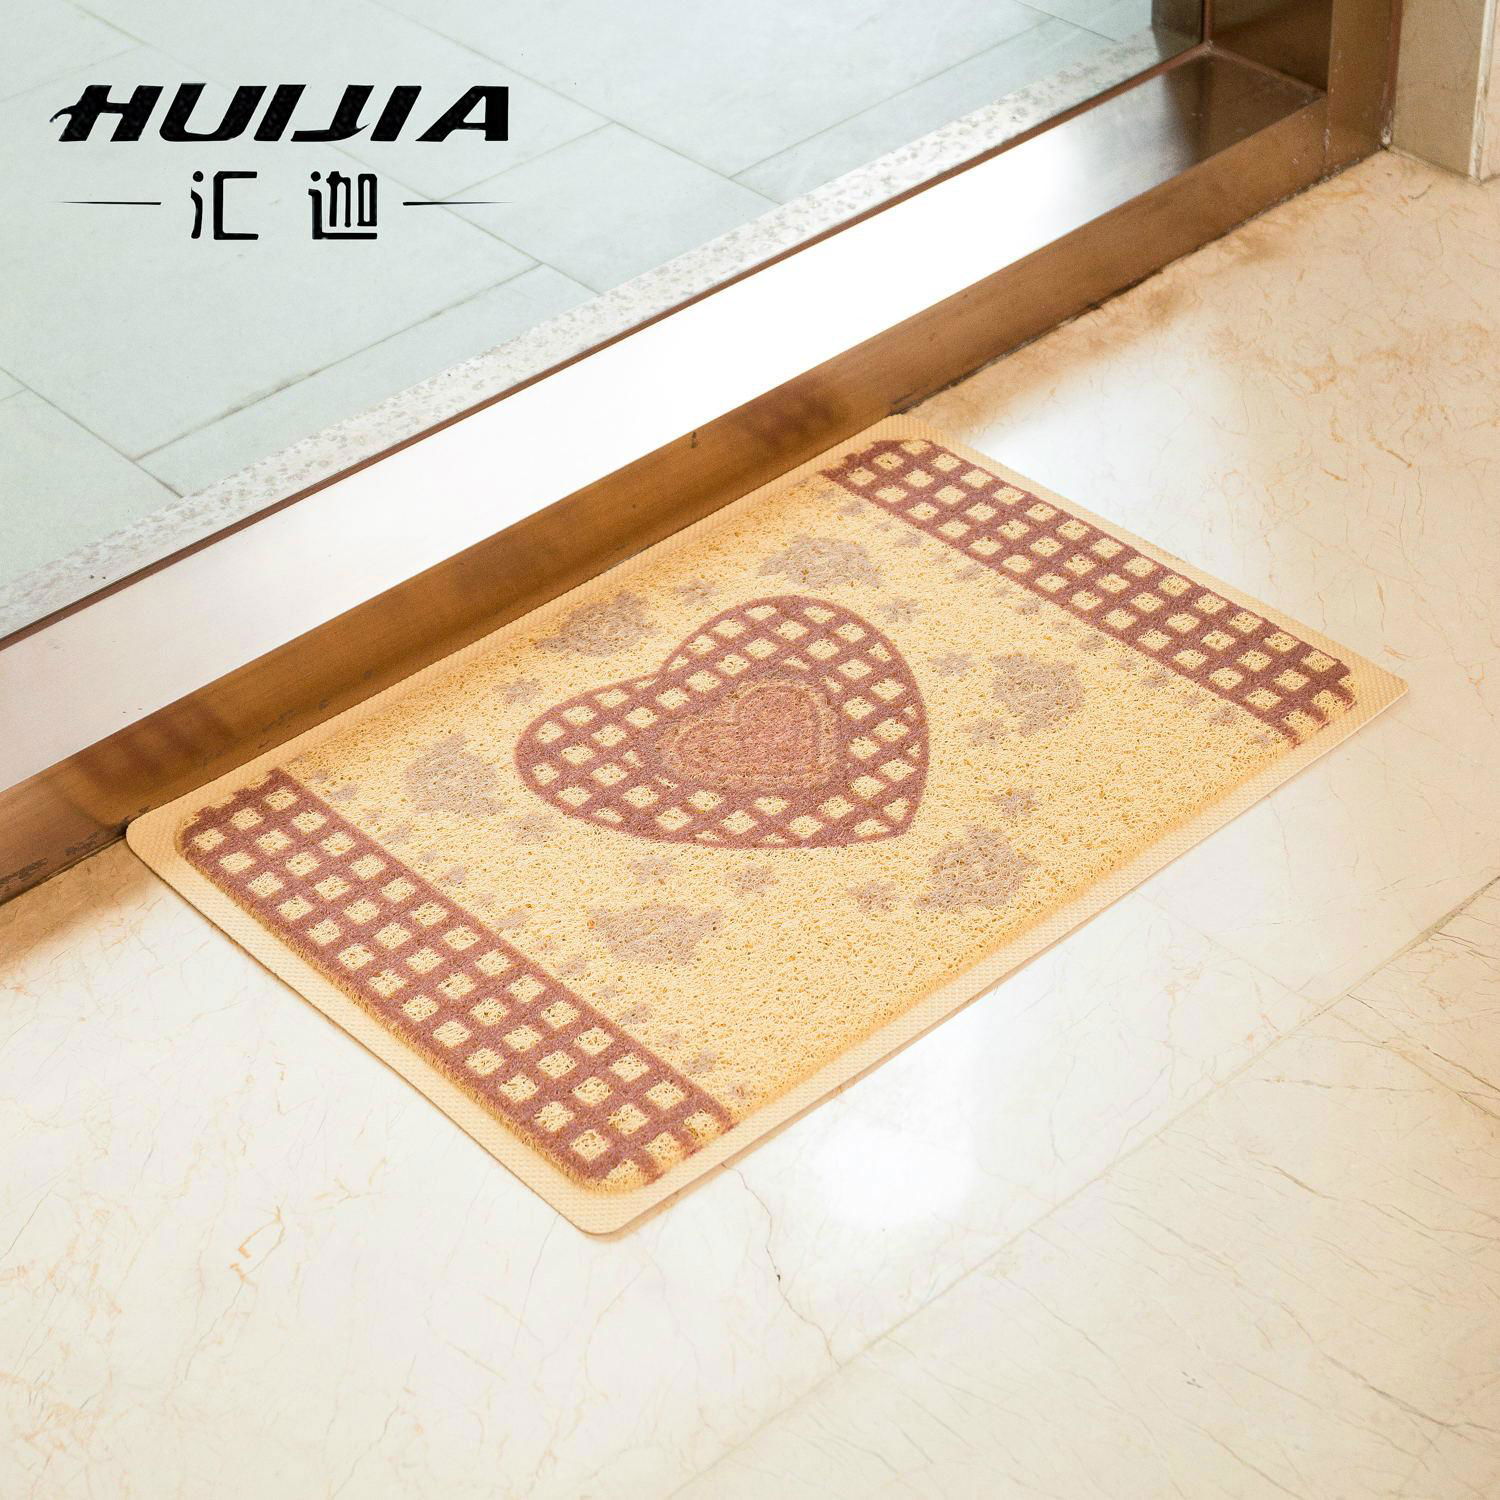 Hot-selling new style printed pvc coil door mat  3